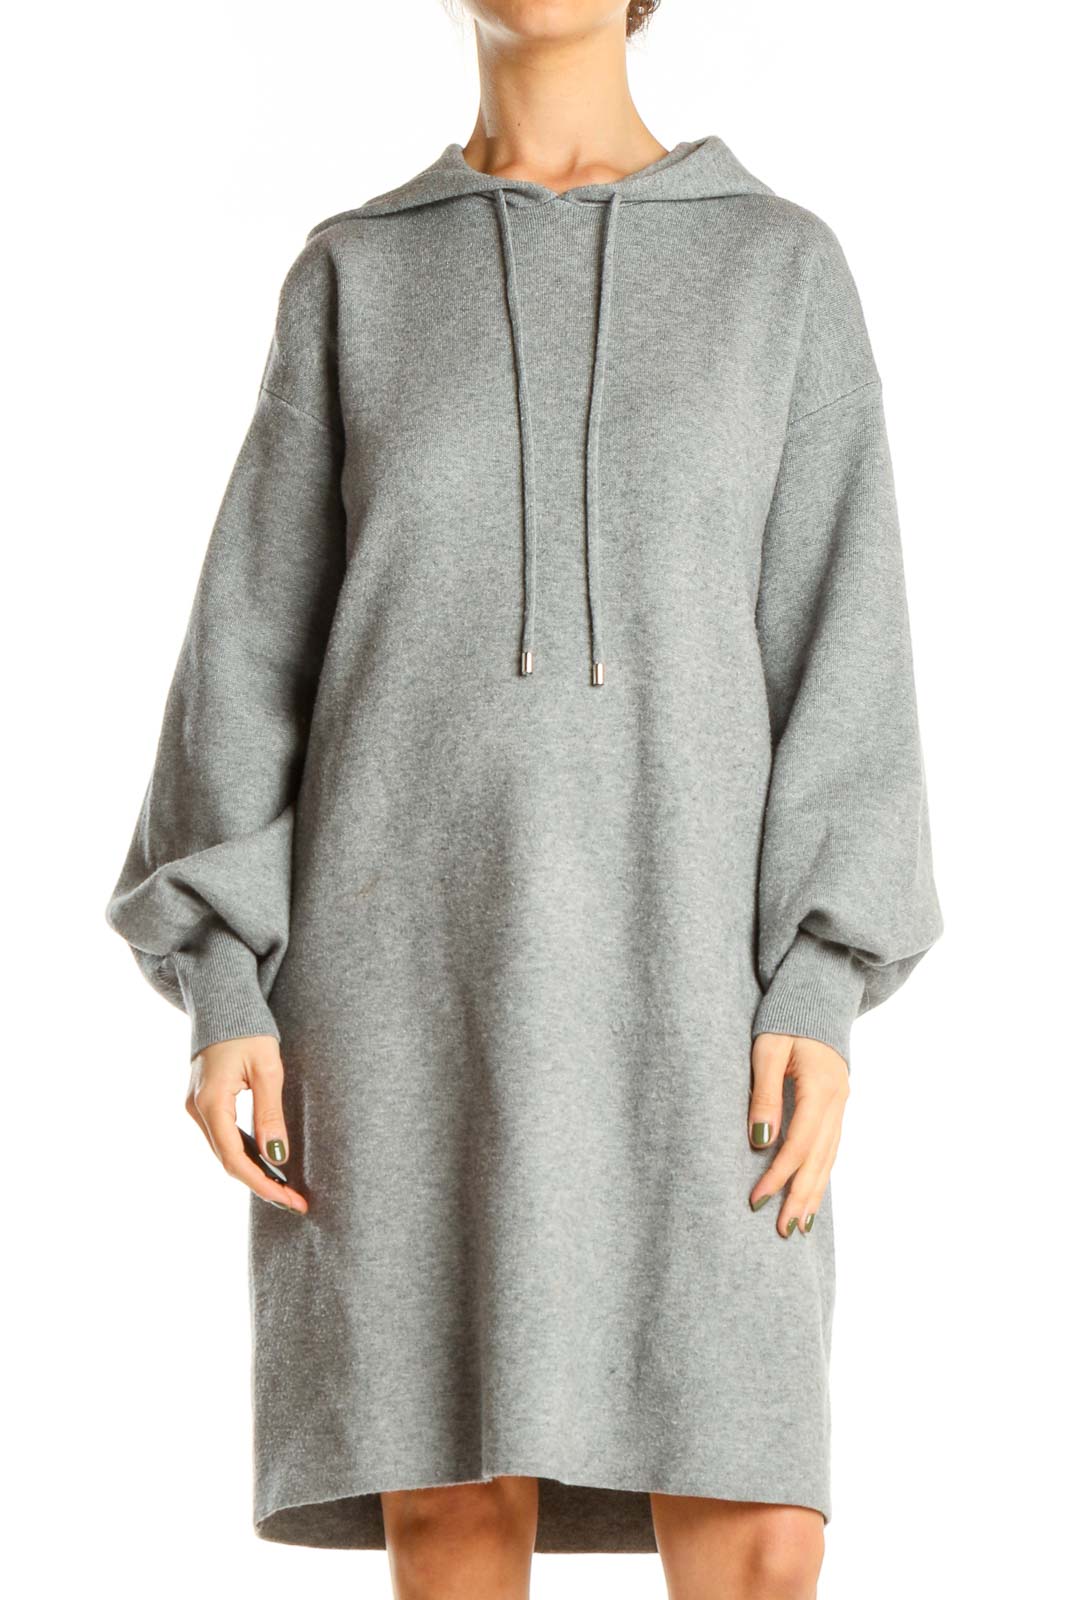 Gray Casual Sweater Dress with Hood Front